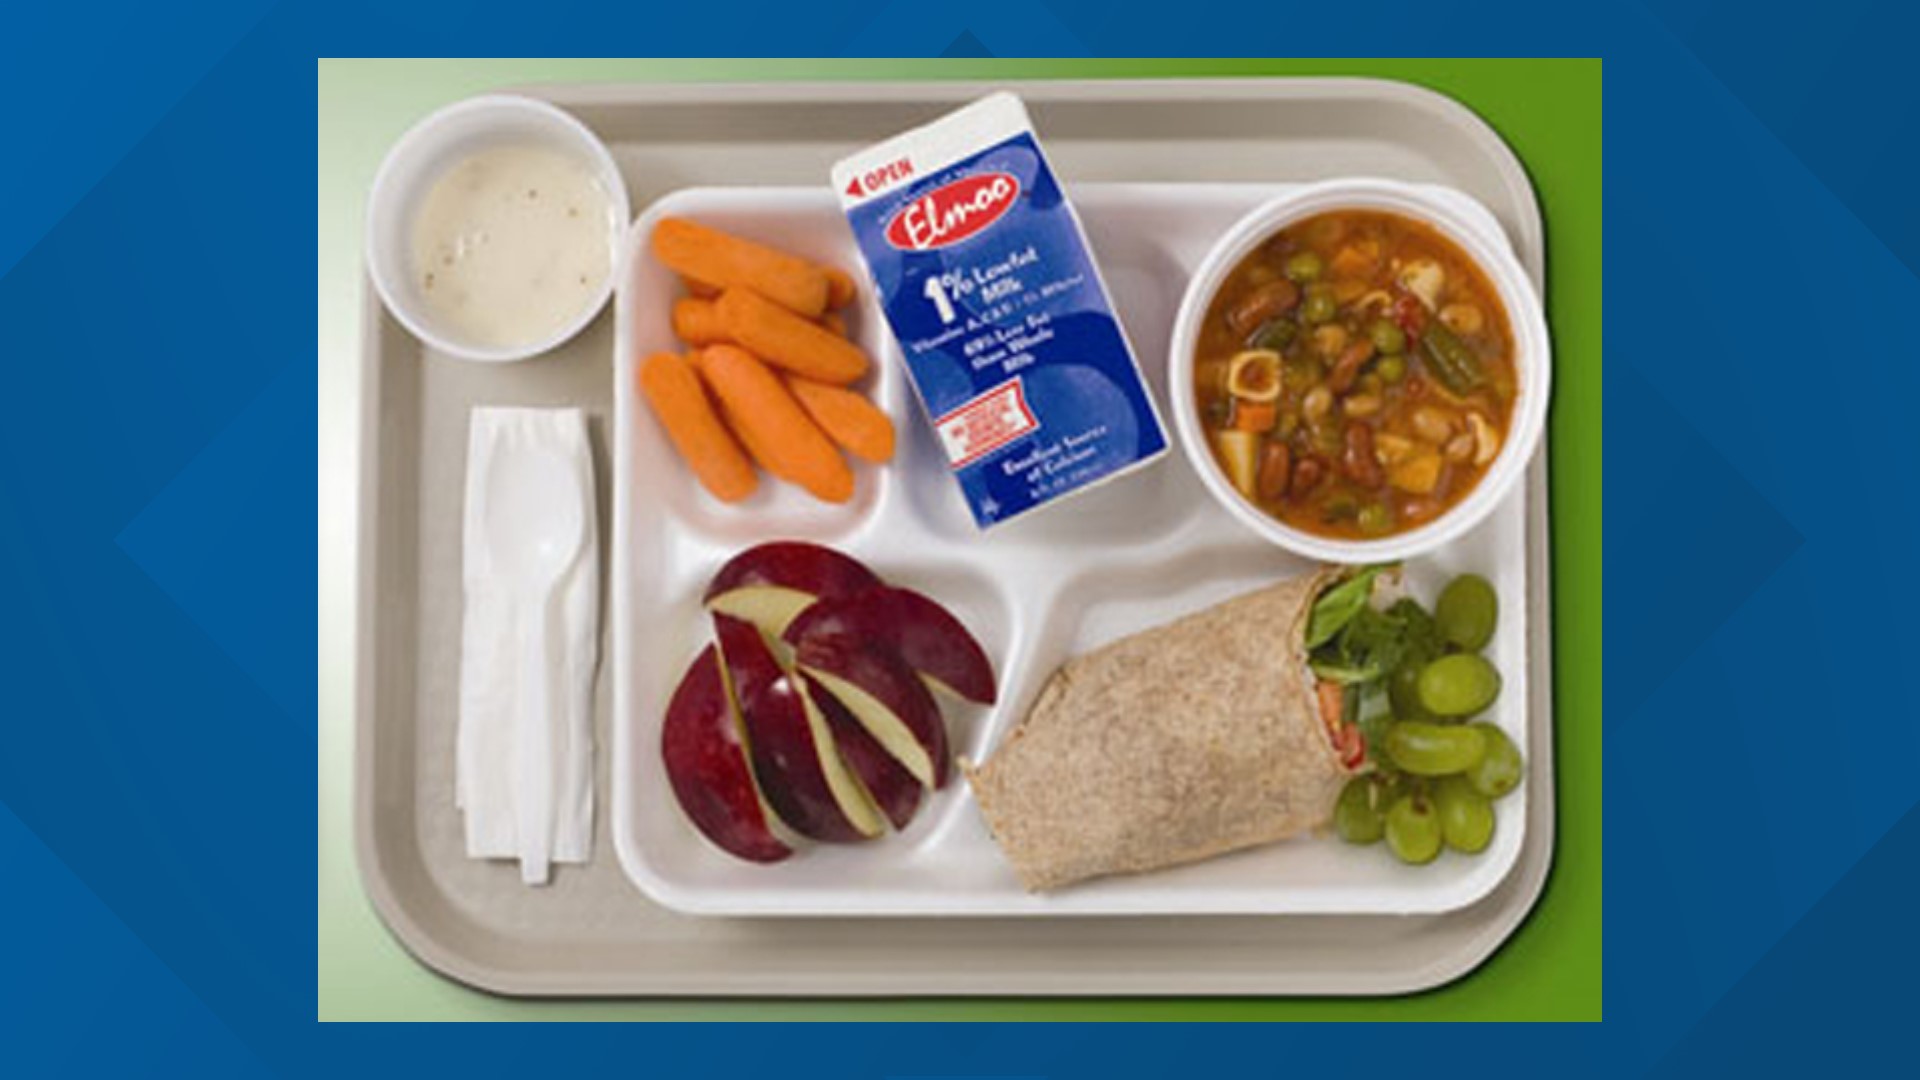 Students will have to choose at least three items deemed "healthy and nutritious" by the USDA to get the meal for free.